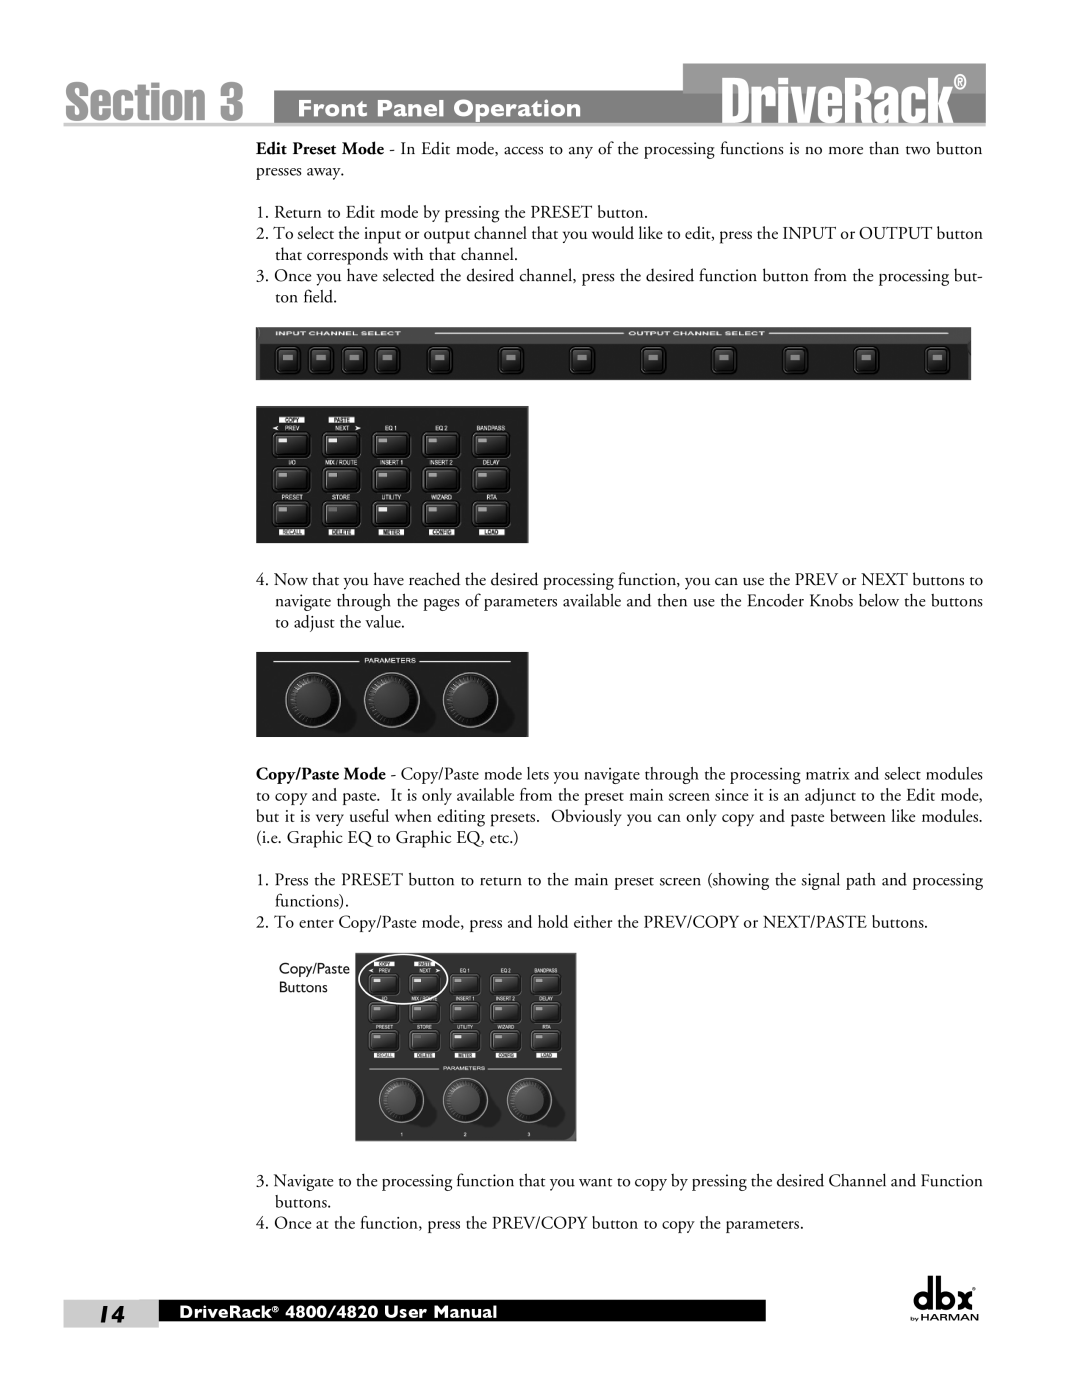 Harman 4800, 4820 user manual DriveRack, Section, Front Panel Operation, Return to Edit mode by pressing the PRESET button 